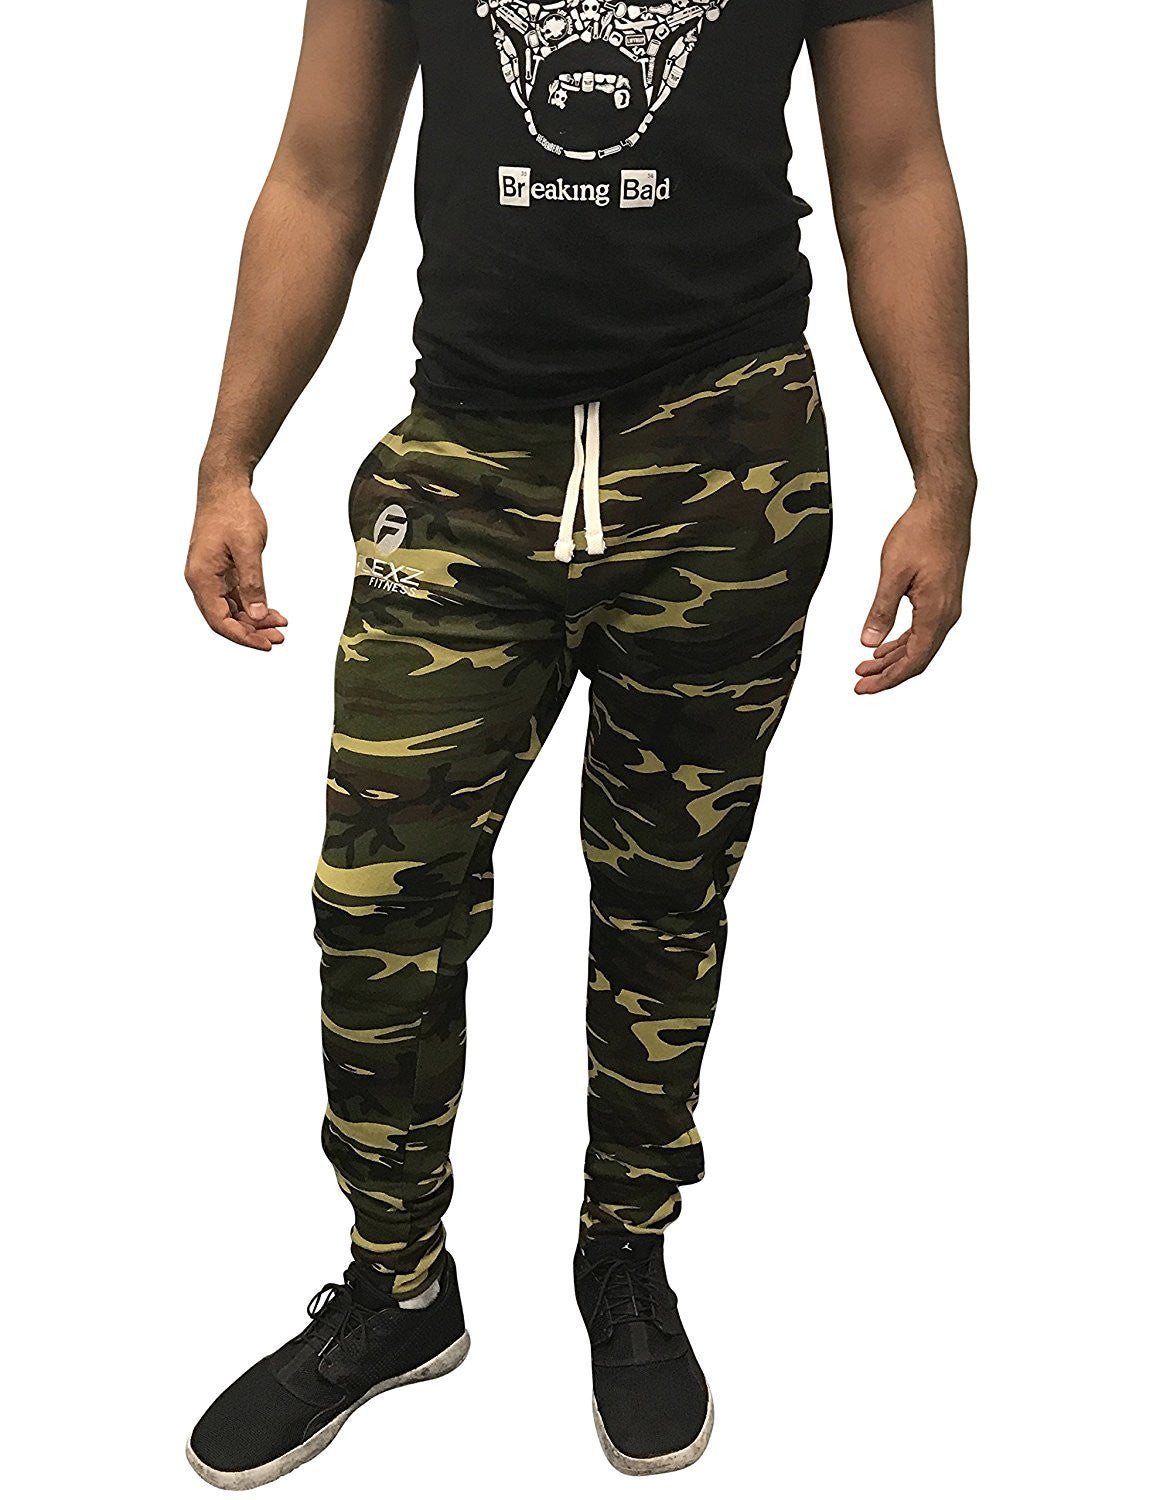 Gym Shark Fitted Sweatpants Bodybuilding - Camo